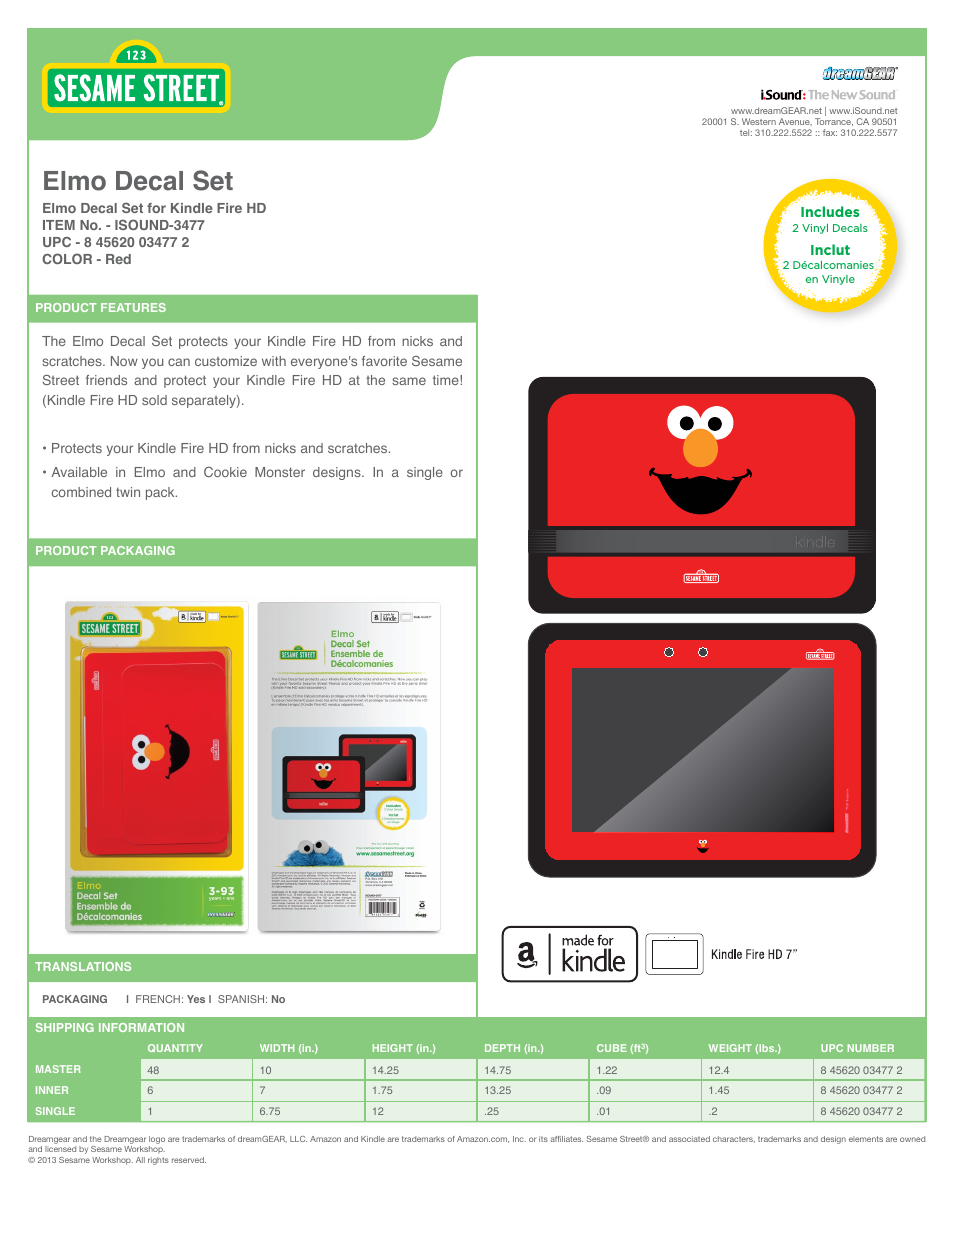 Elmo Decal Set for Kindle Fire HD - Sell Sheet